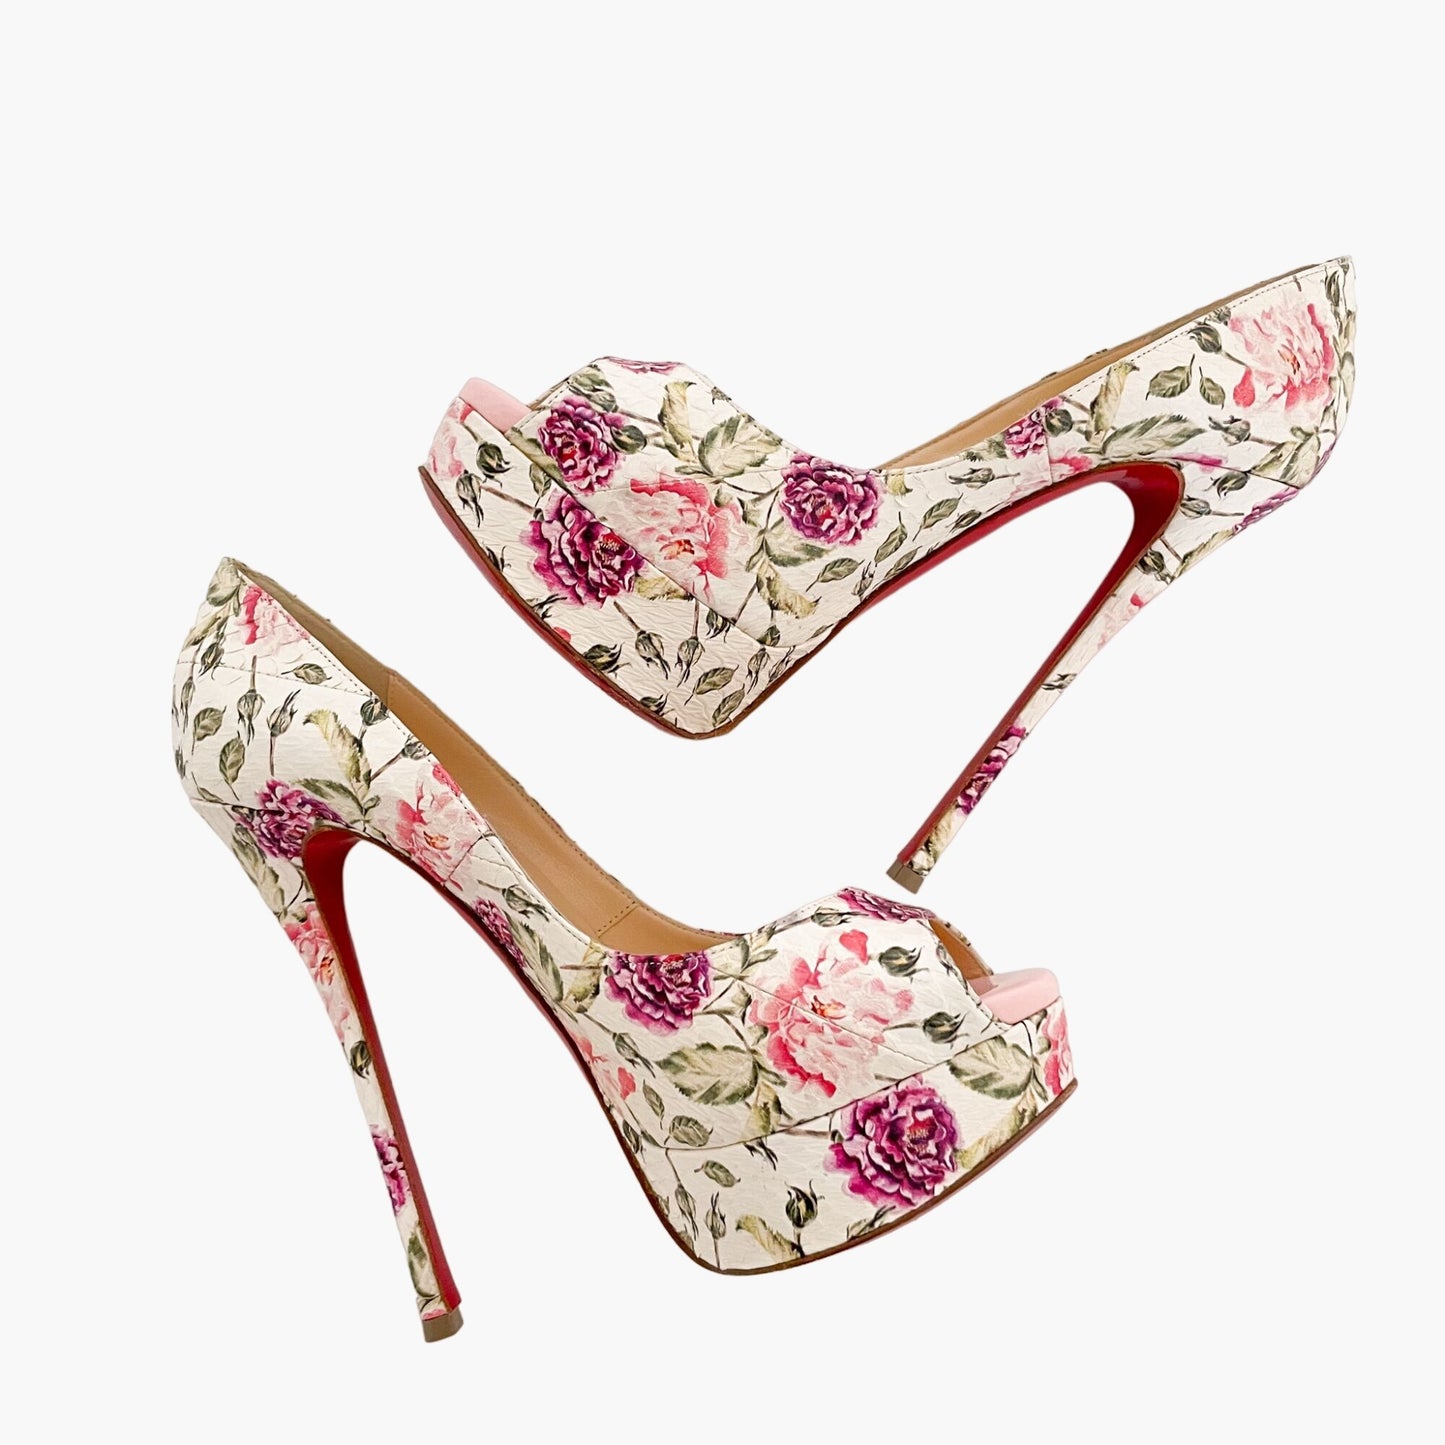 Christian Louboutin Fetish 150 Pumps in Latte Floral Watersnake and Pompadour Patent Size 37.5